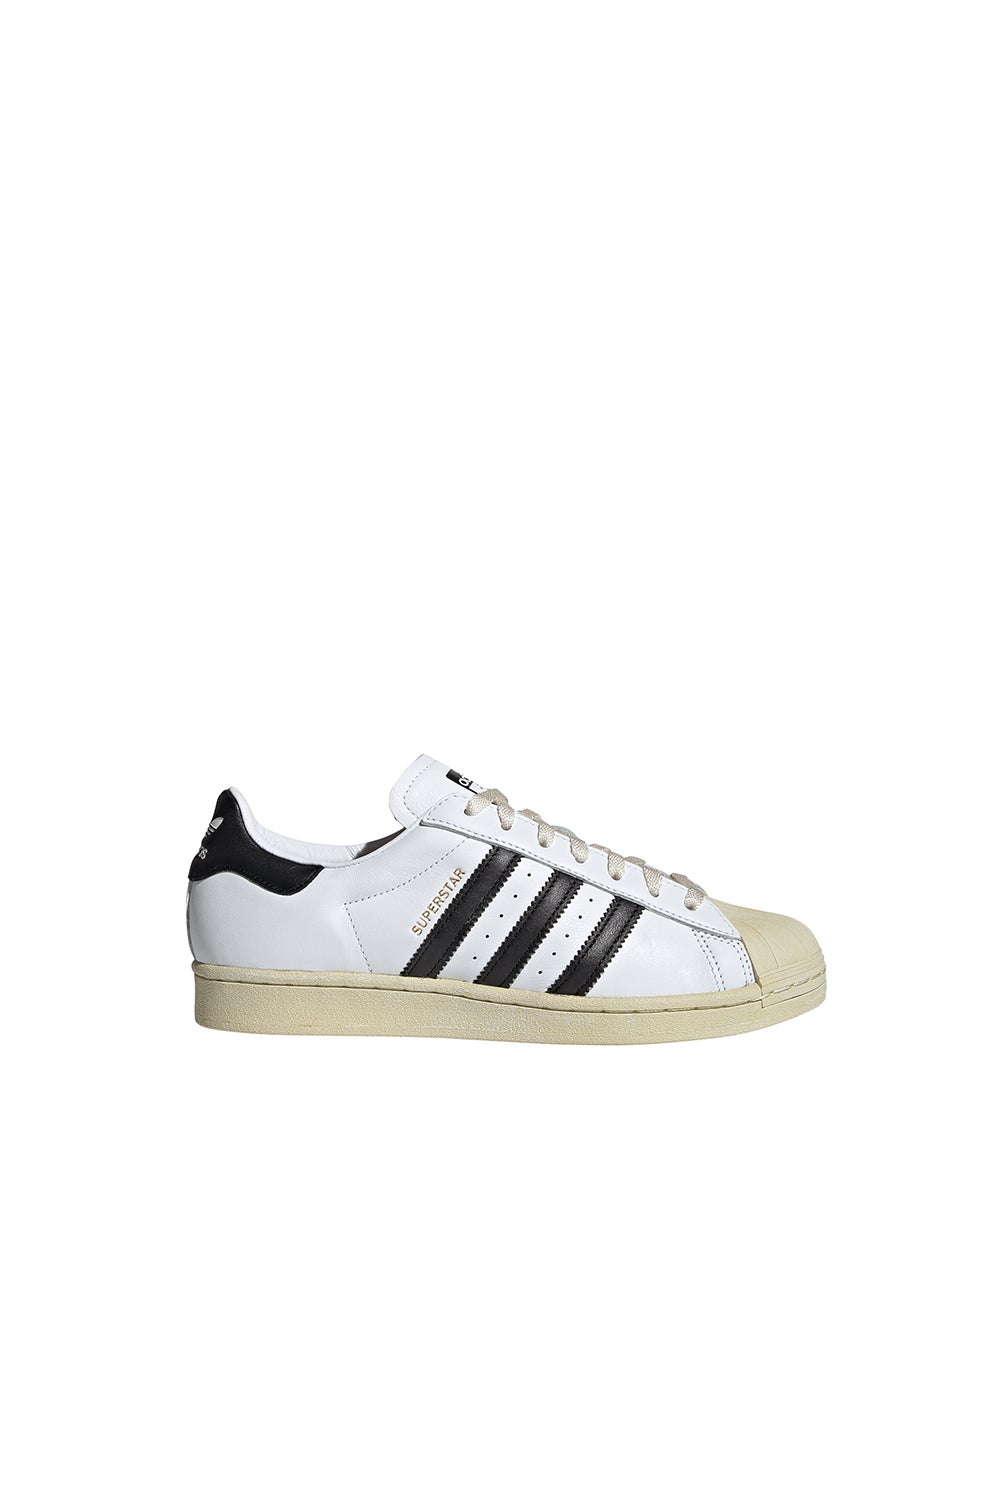 adidas Superstar Shoes Cloud White